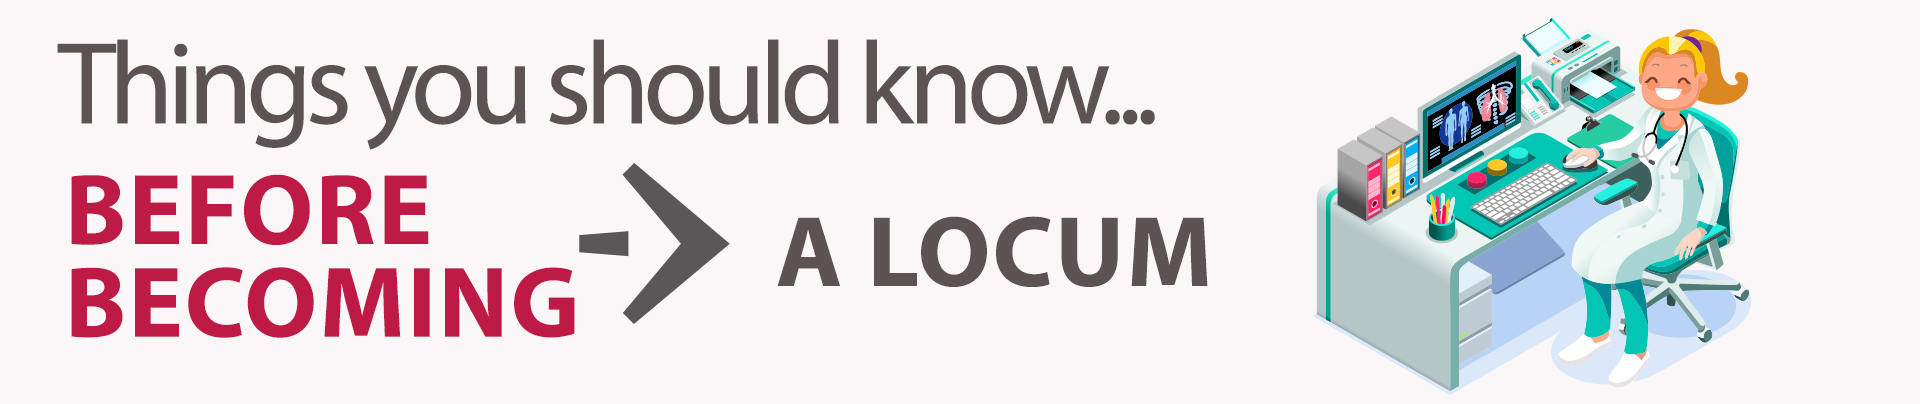 Things you should know before becoming a locum